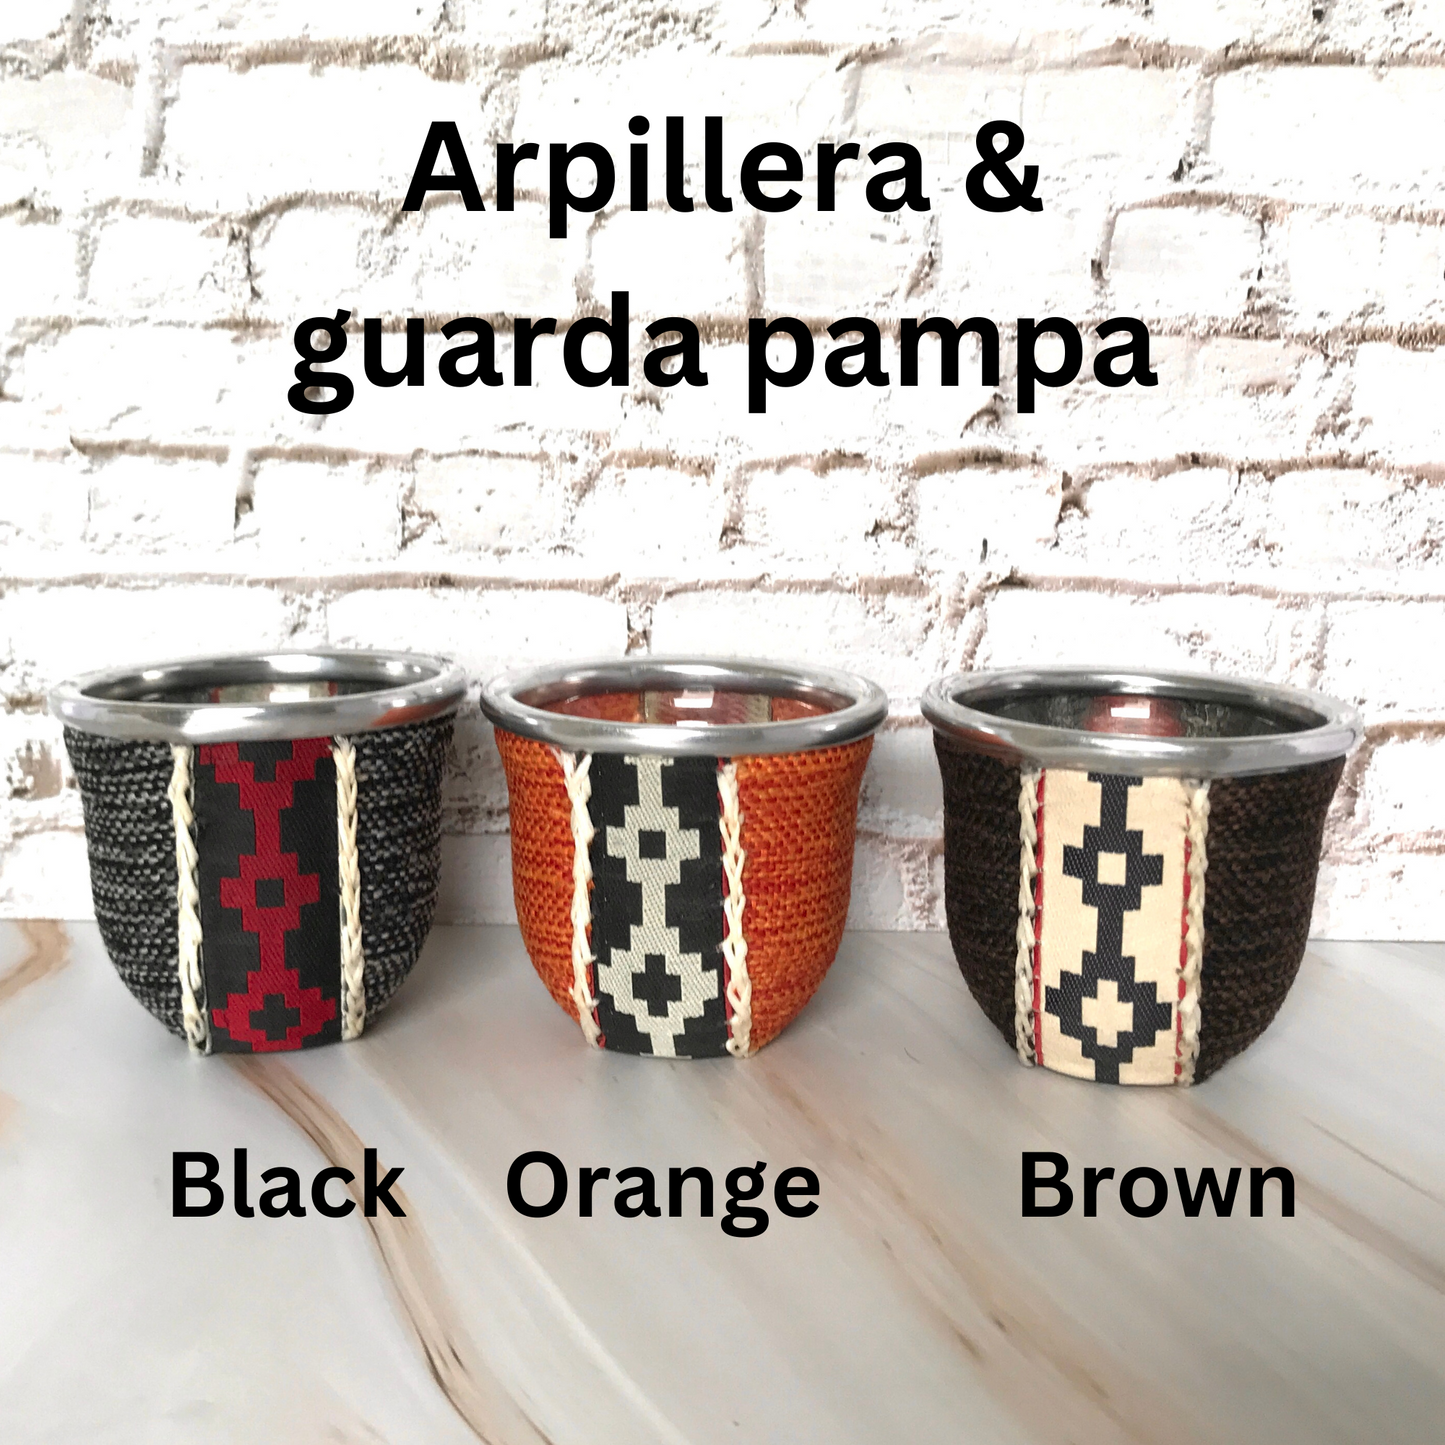 wrapped glass mate gourd & bombilla set (aguayo, arpillera or faux leather)